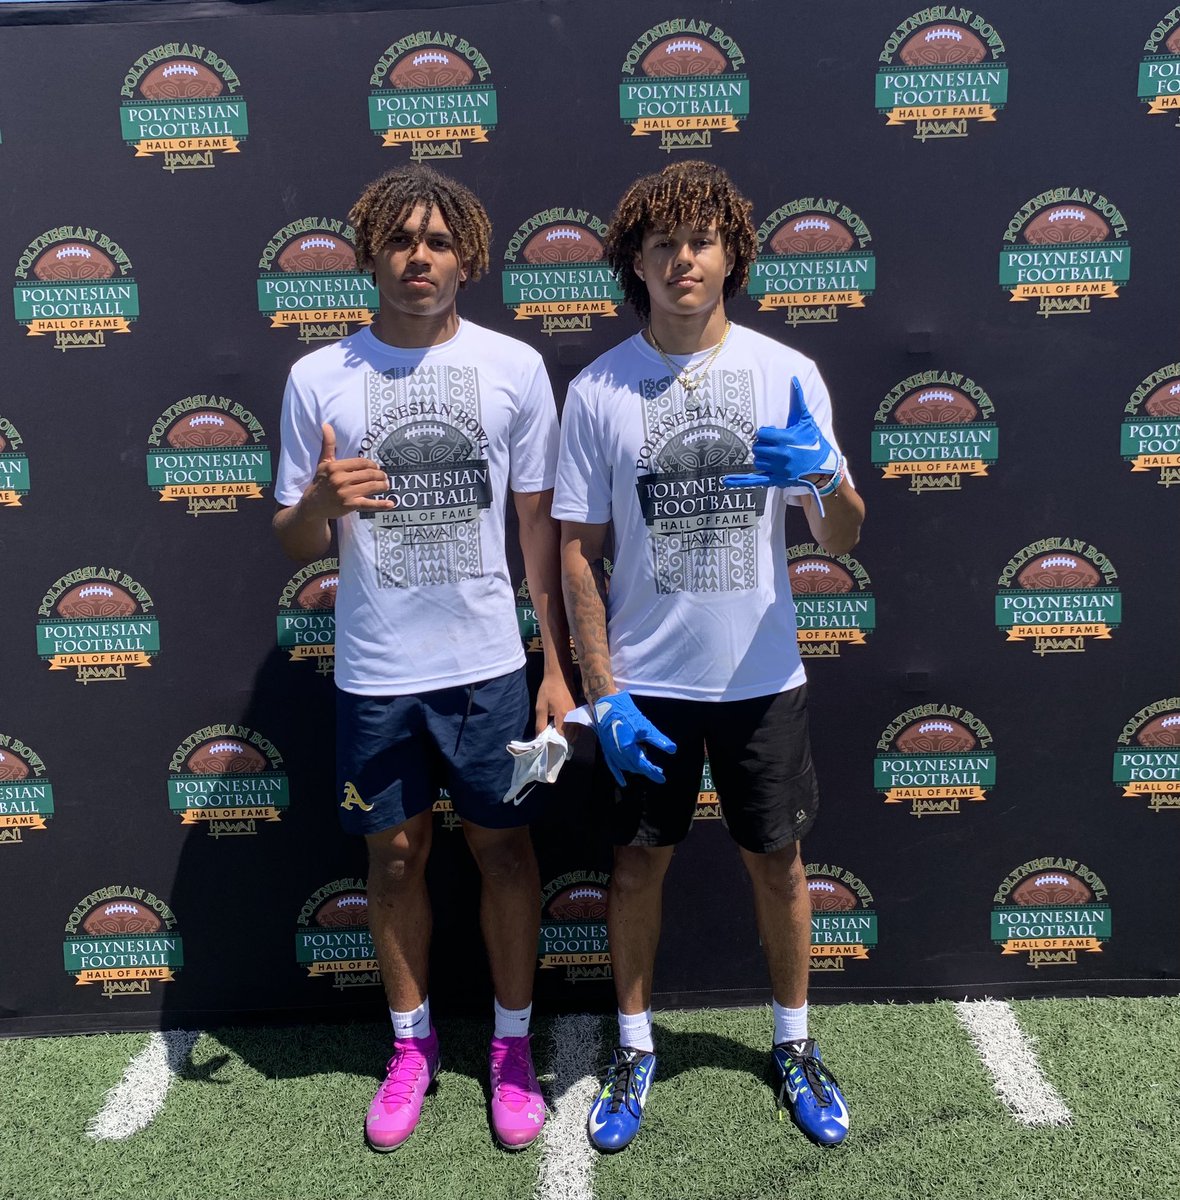 Congratulations to our 2025 Polynesian Bowl All-Stars selected at our East National Combine & Showcase today! 4 ⭐️ DB JUSTICE FITZPATRICK 4 ⭐️ DB GRACESON LITTLETON